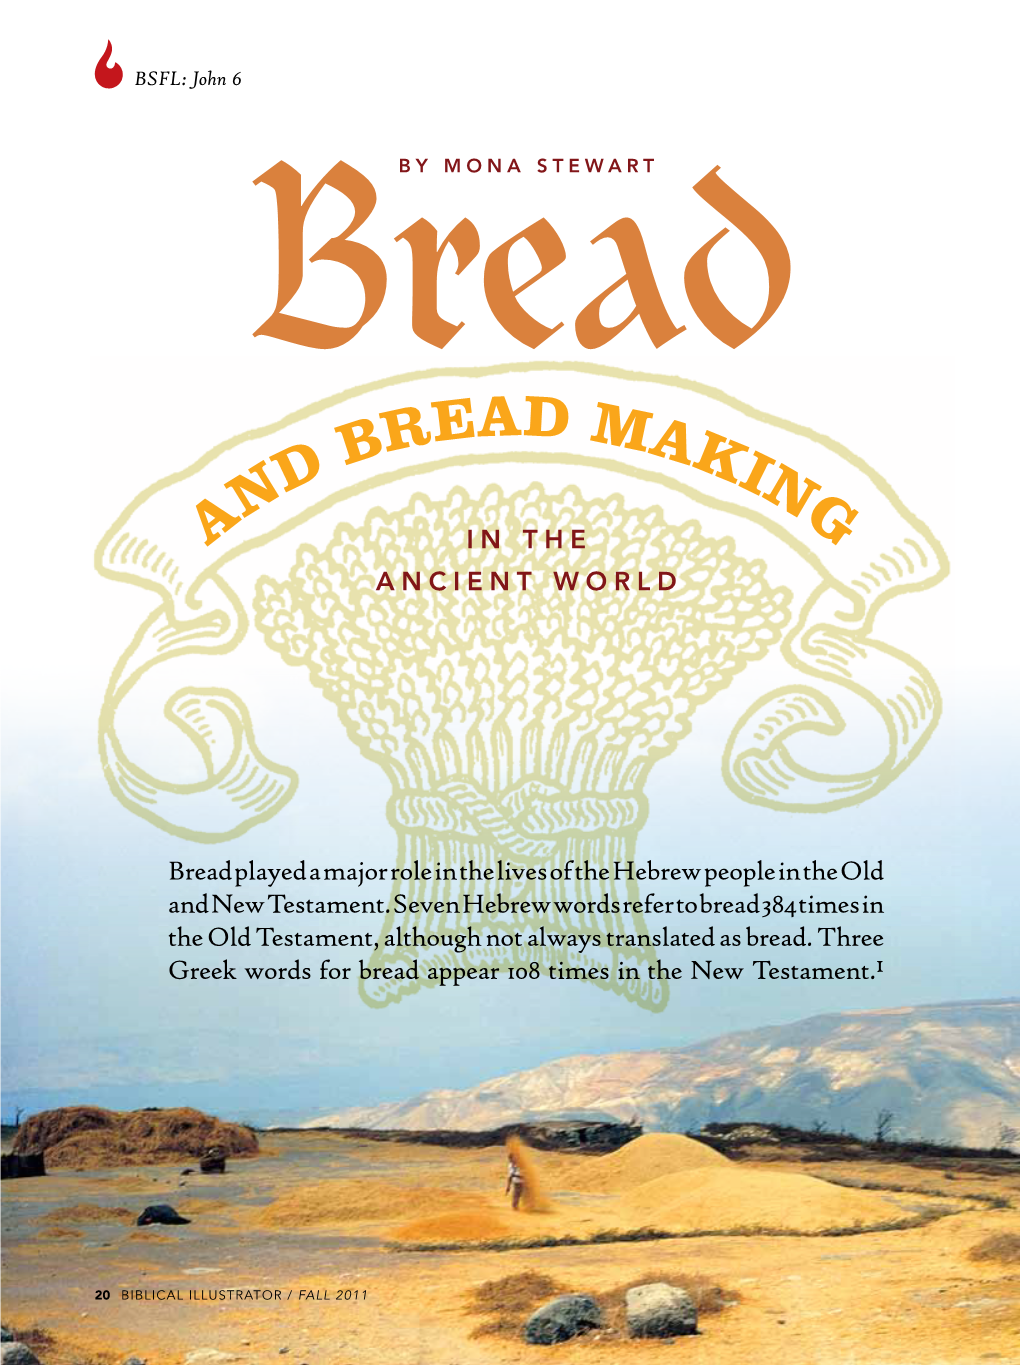 Bread Ad Bre Mak D in N G a in the ANCIENT WORLD